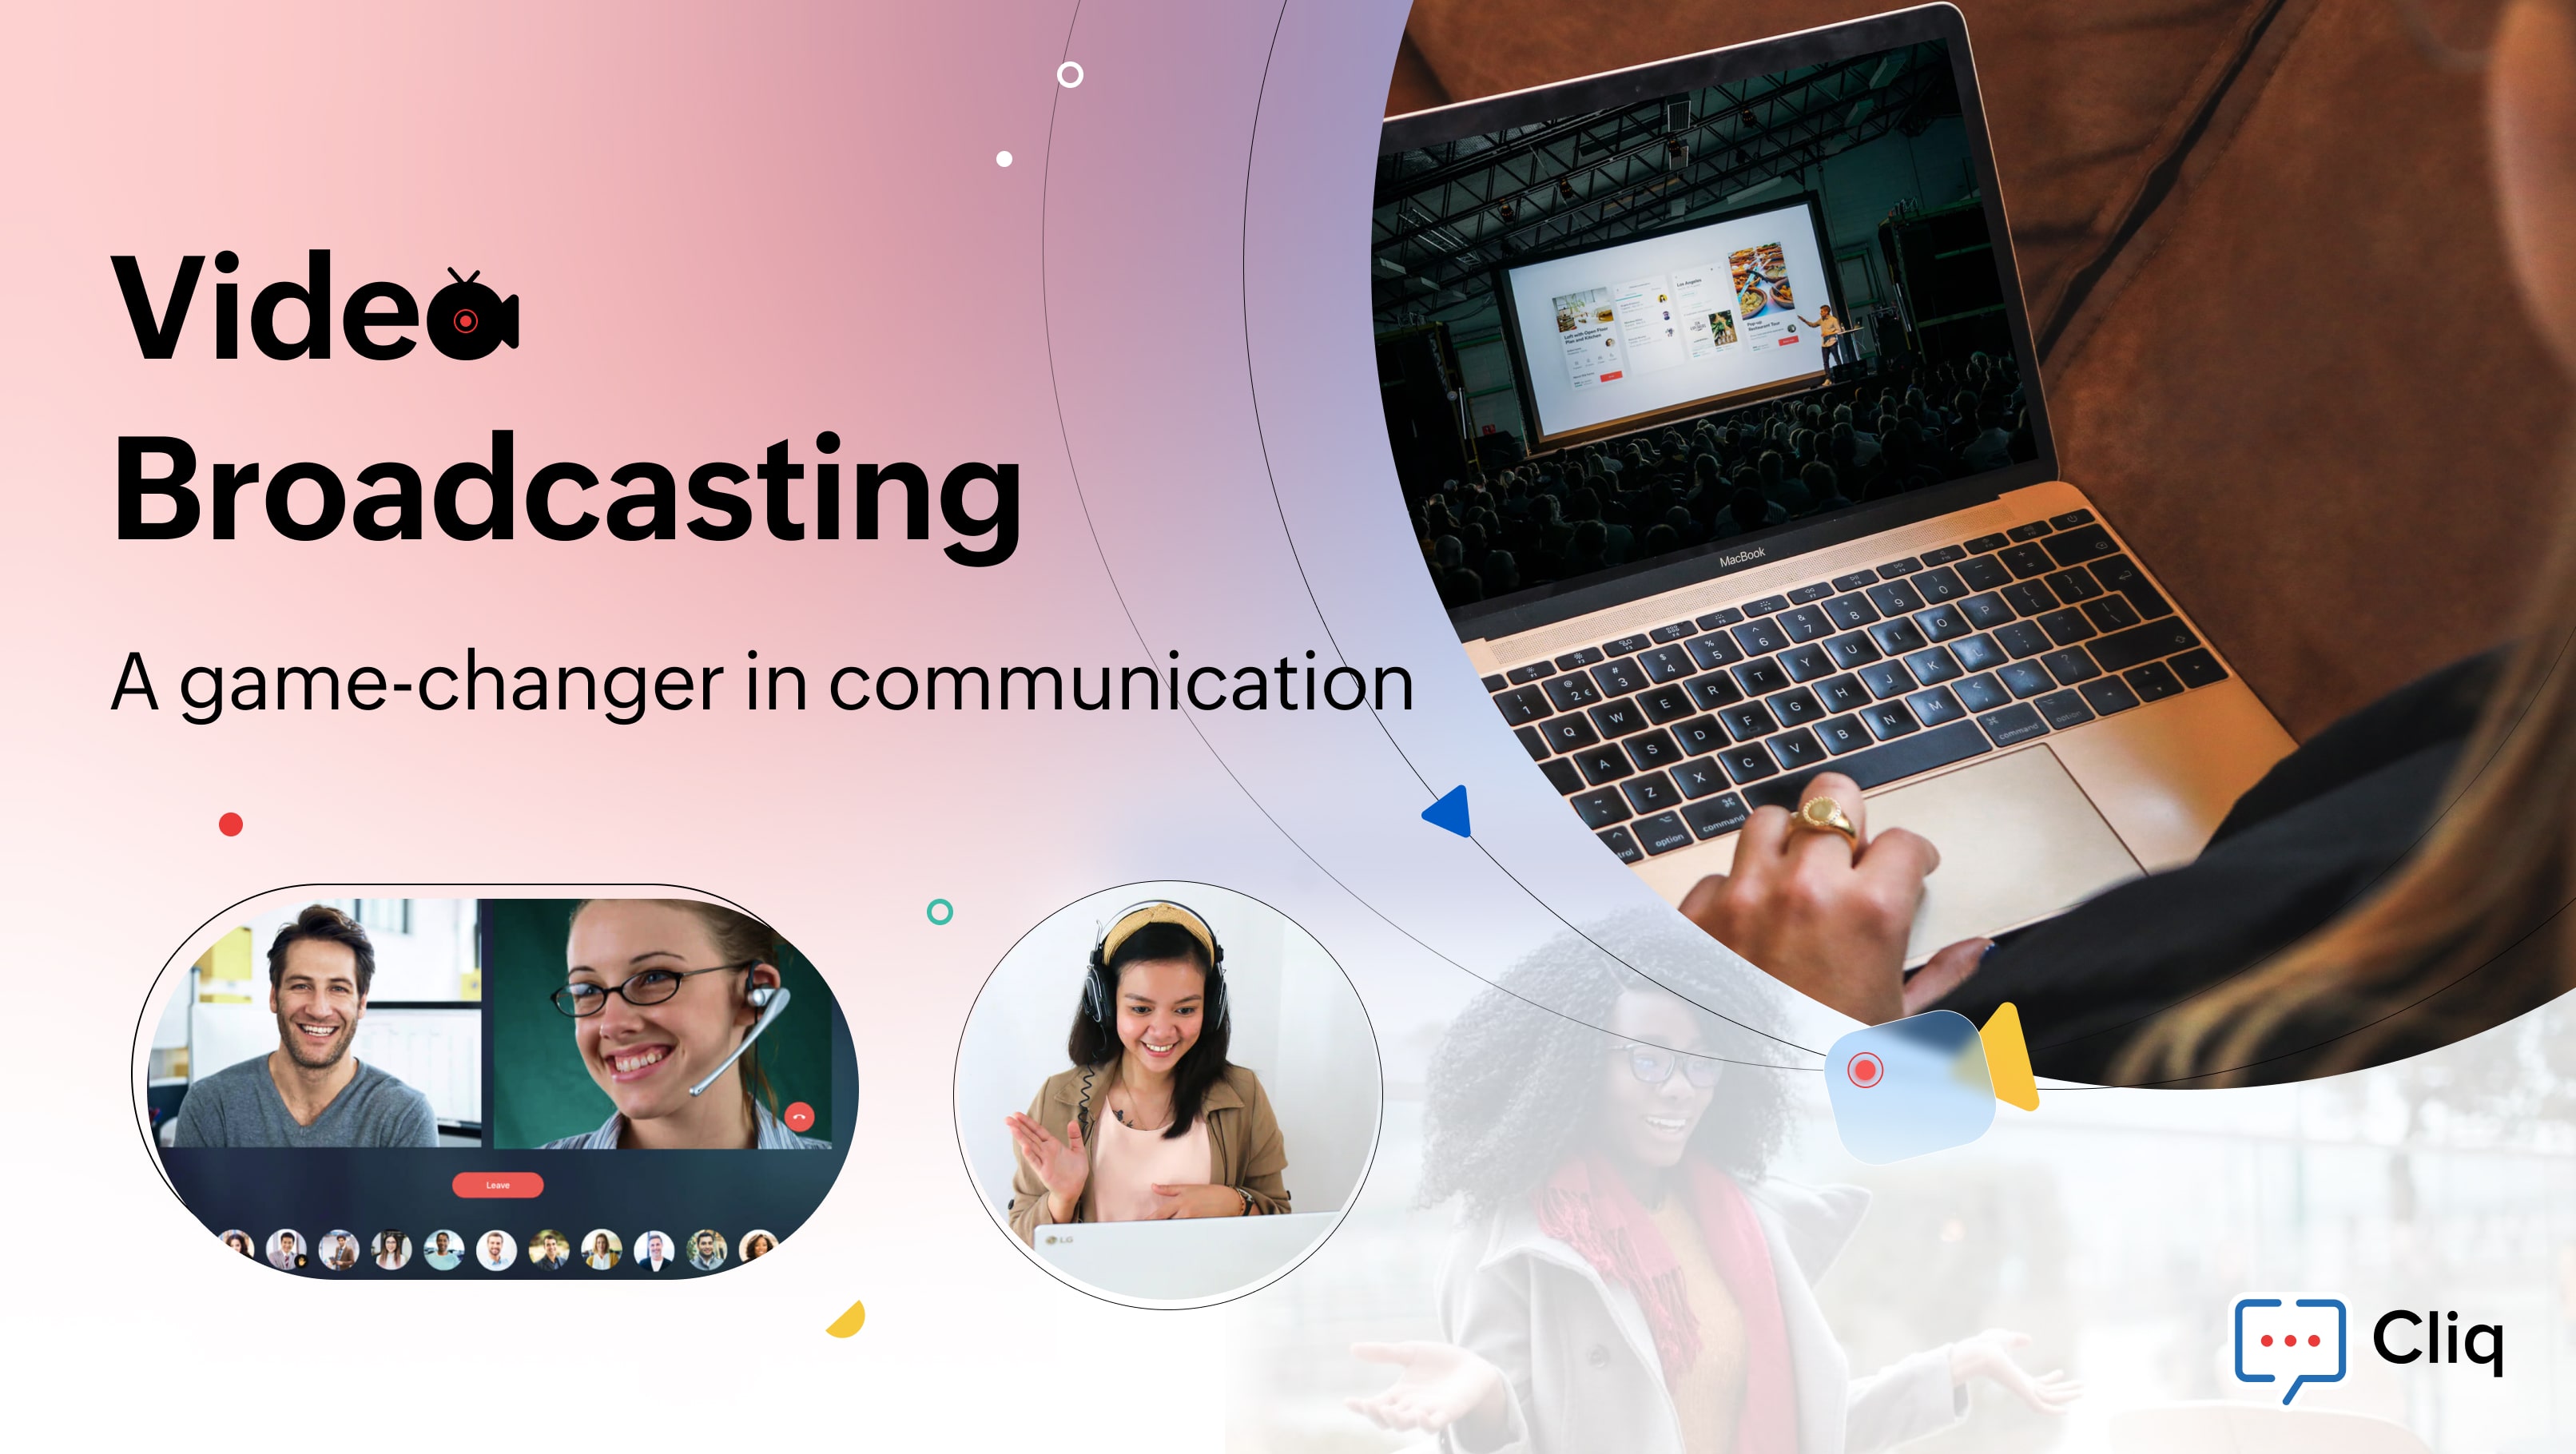 Video broadcasting: A game-changer in communication